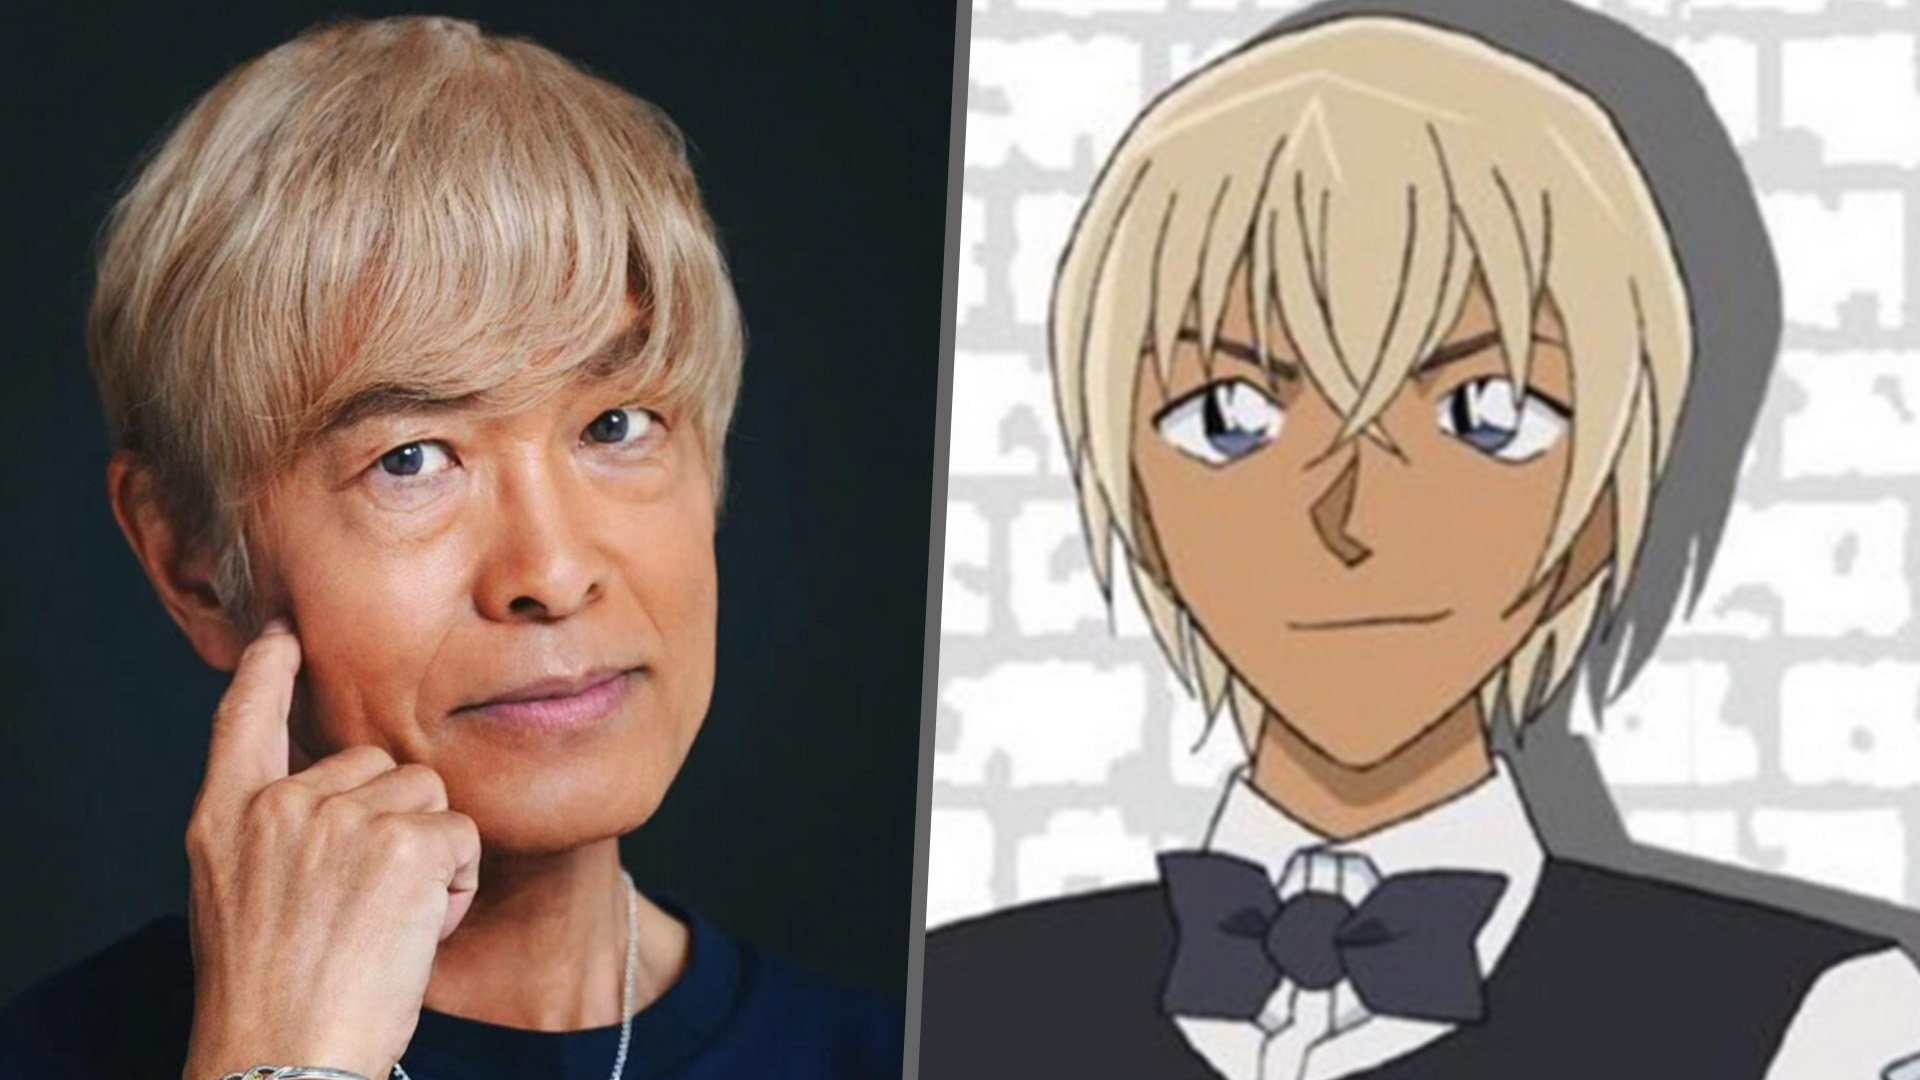 A 70-year-old actor in Japan, who is the voice of some of the country’s most famous anime characters, has apologised for seducing a fan nearly 40 years his junior and forcing her to have an abortion during their almost five-year affair. Photo: SCMP composite/Douyin